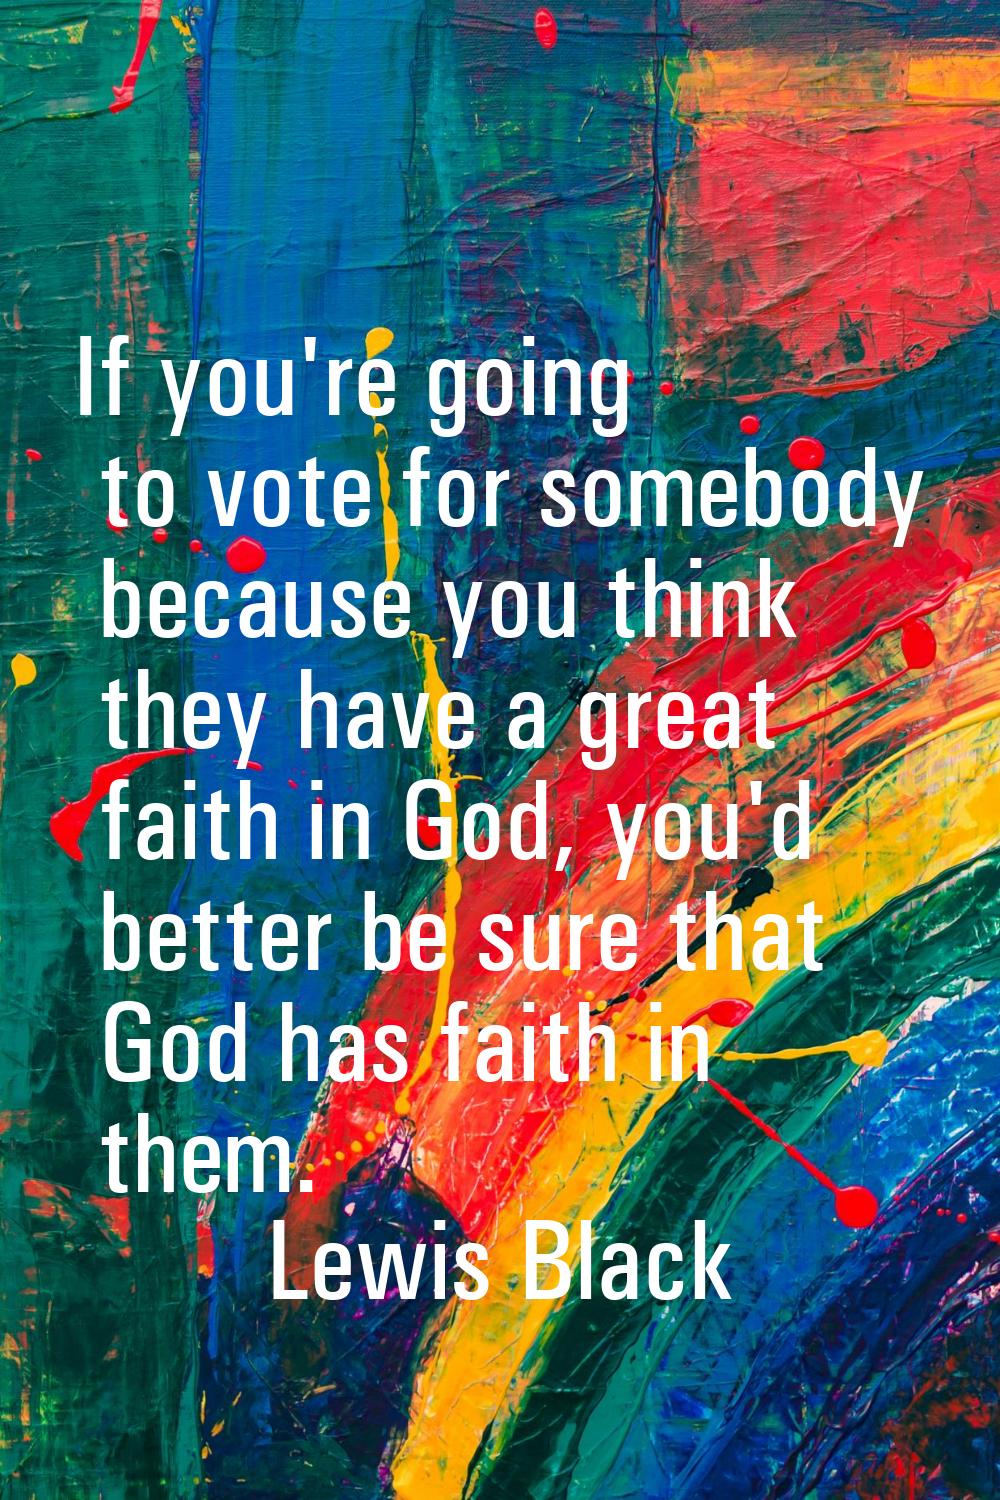 If you're going to vote for somebody because you think they have a great faith in God, you'd better